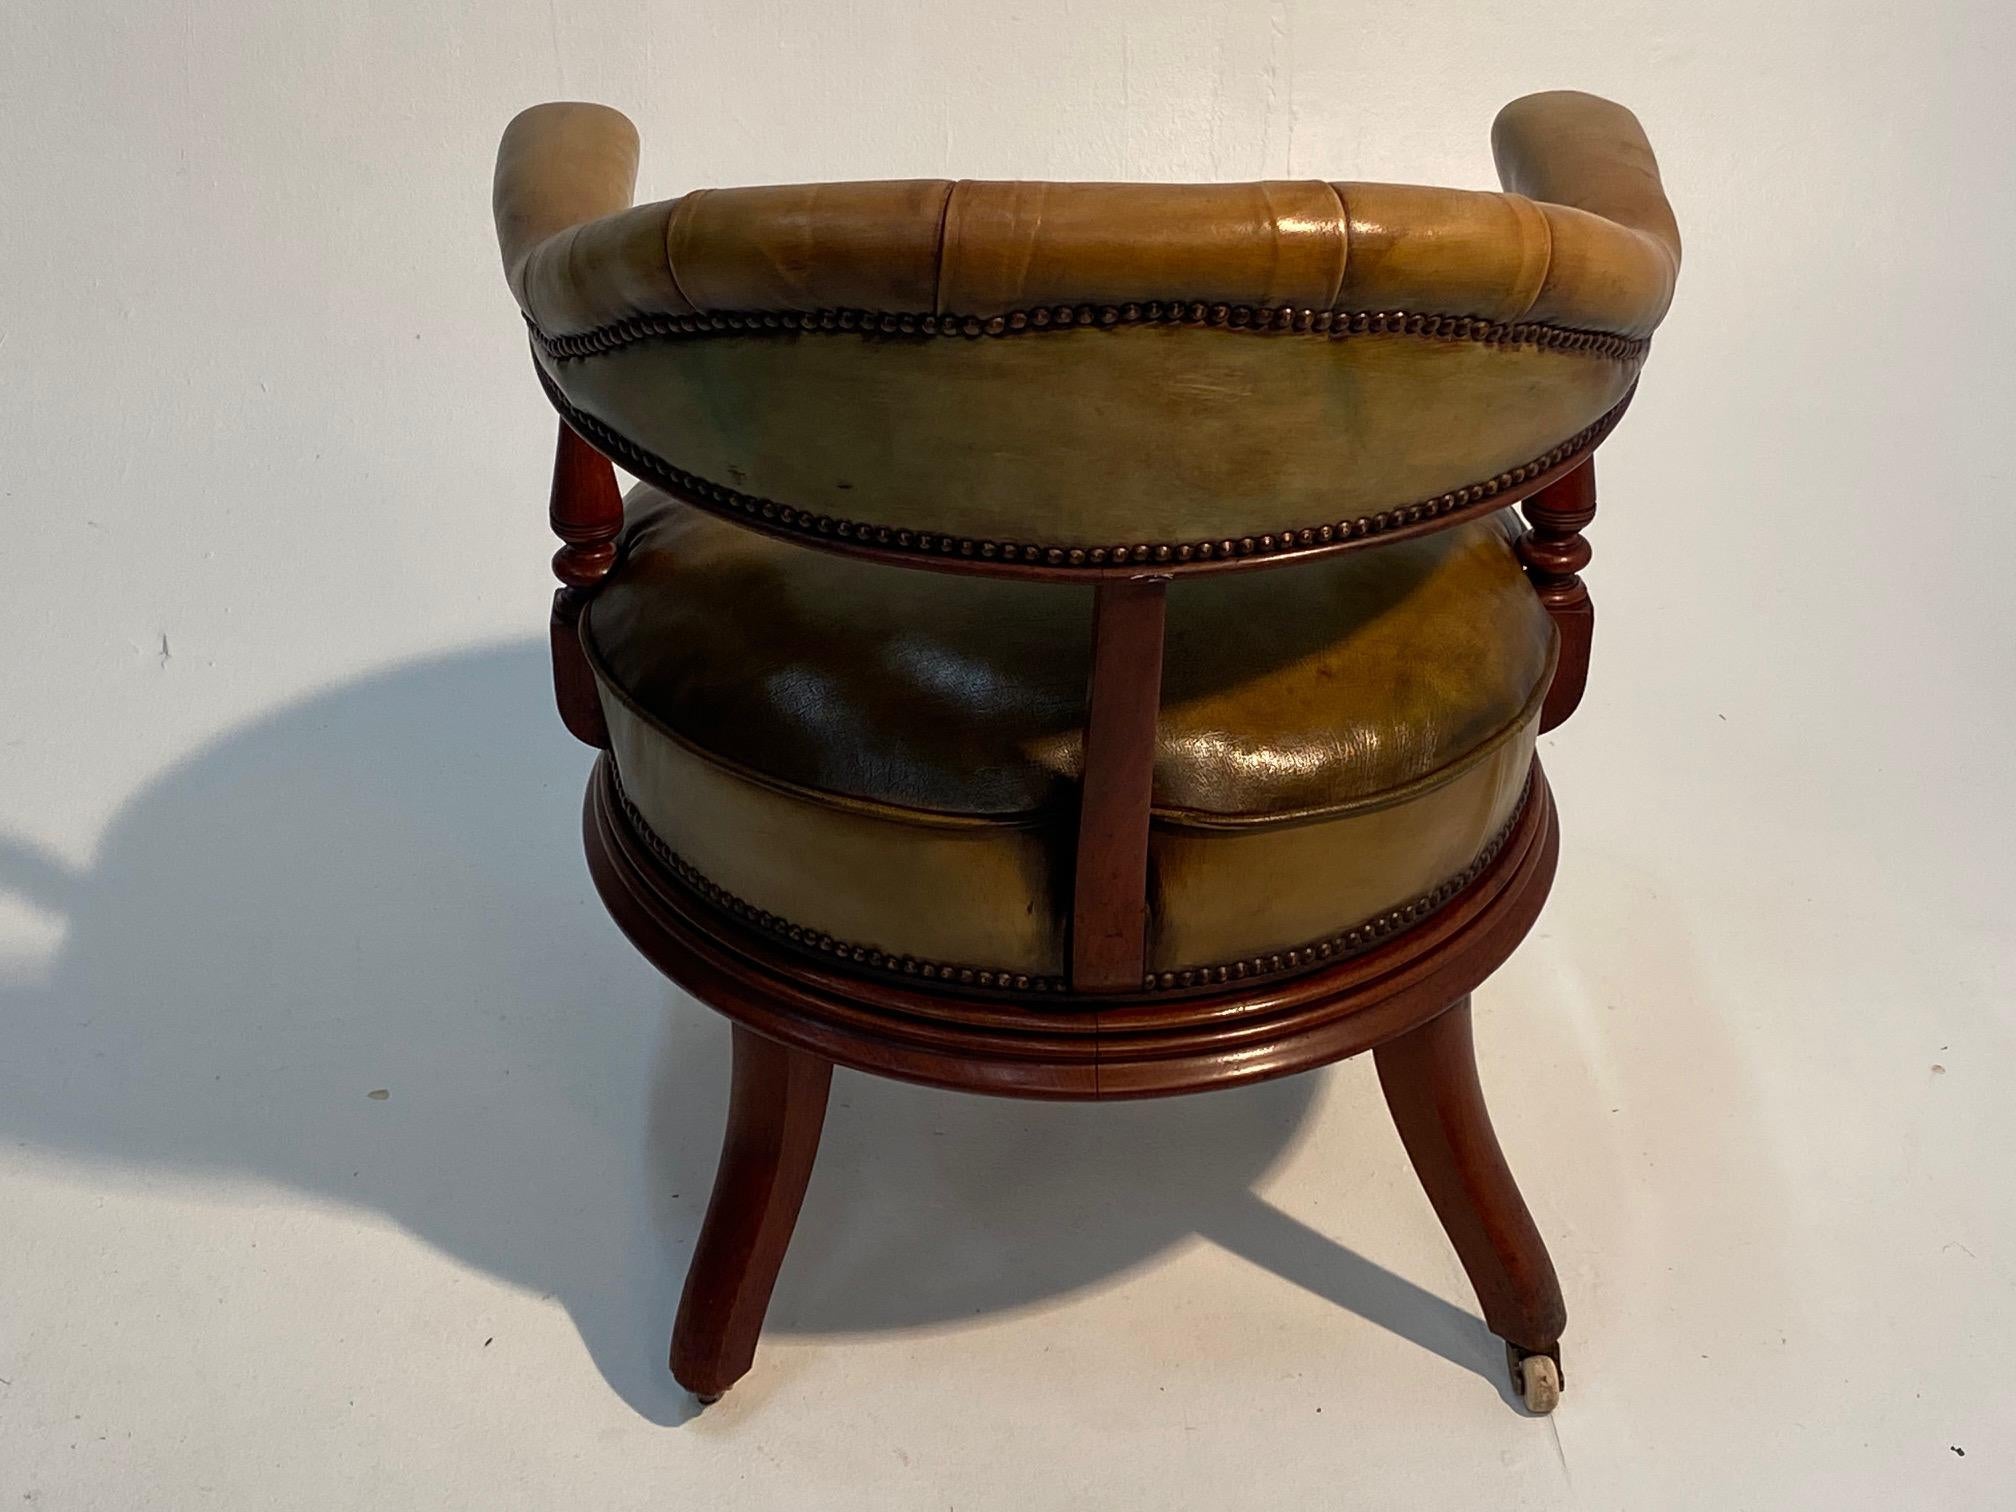 A very handsome rotating library or desk chair having mahogany frame with curved back and button tufted backrest, stylish pill box round hat shaped seat cushion, upholstered in mossy green leather with brass nailheads. Legs have original porcelain